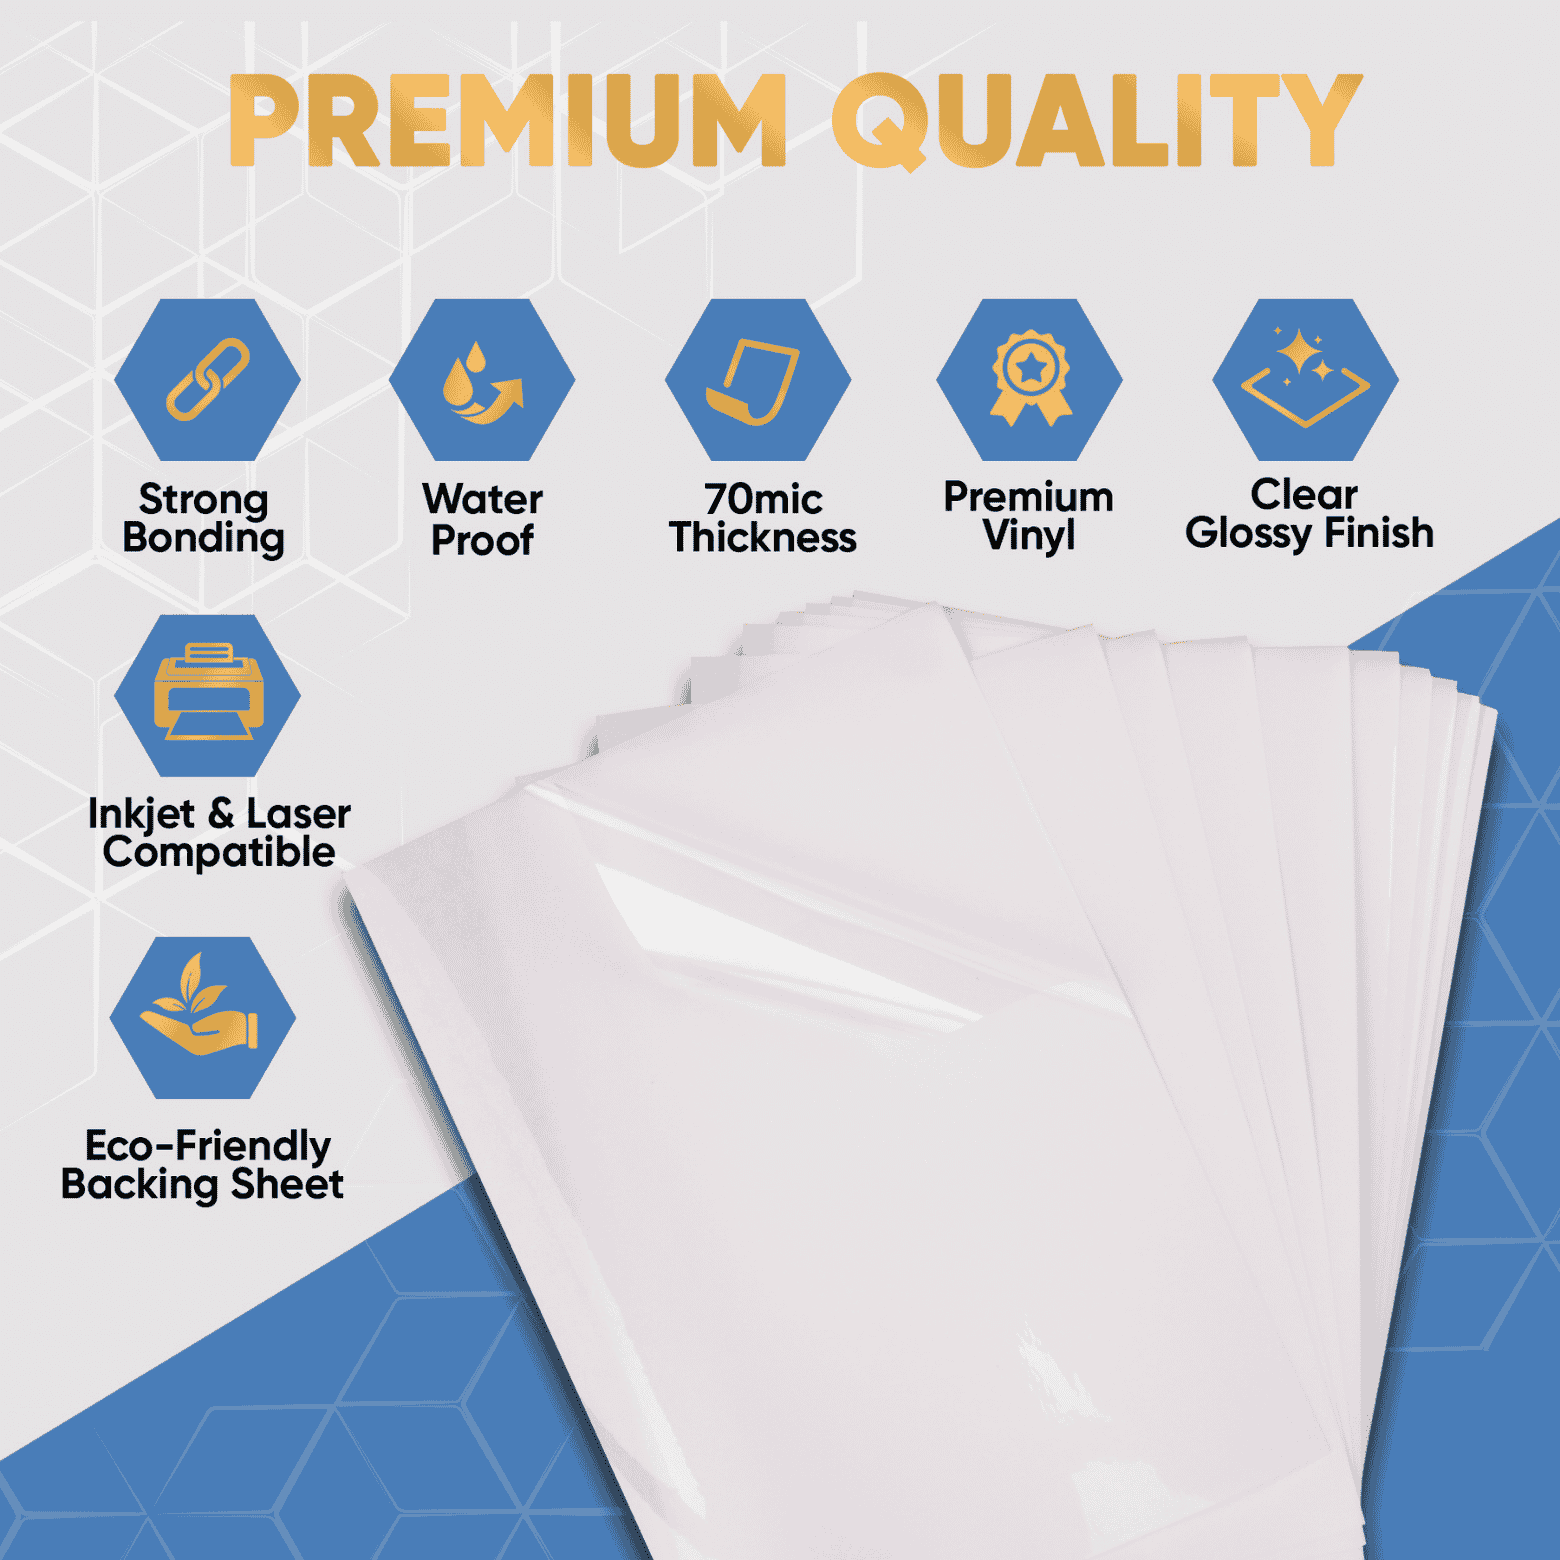 Premium Printable Vinyl Sticker Paper - Glossy White 8.5 X 11 Inch Sheets  For Your Inkjet Or Laser Printer - 15 Waterproof Decal Paper Sheets Dry